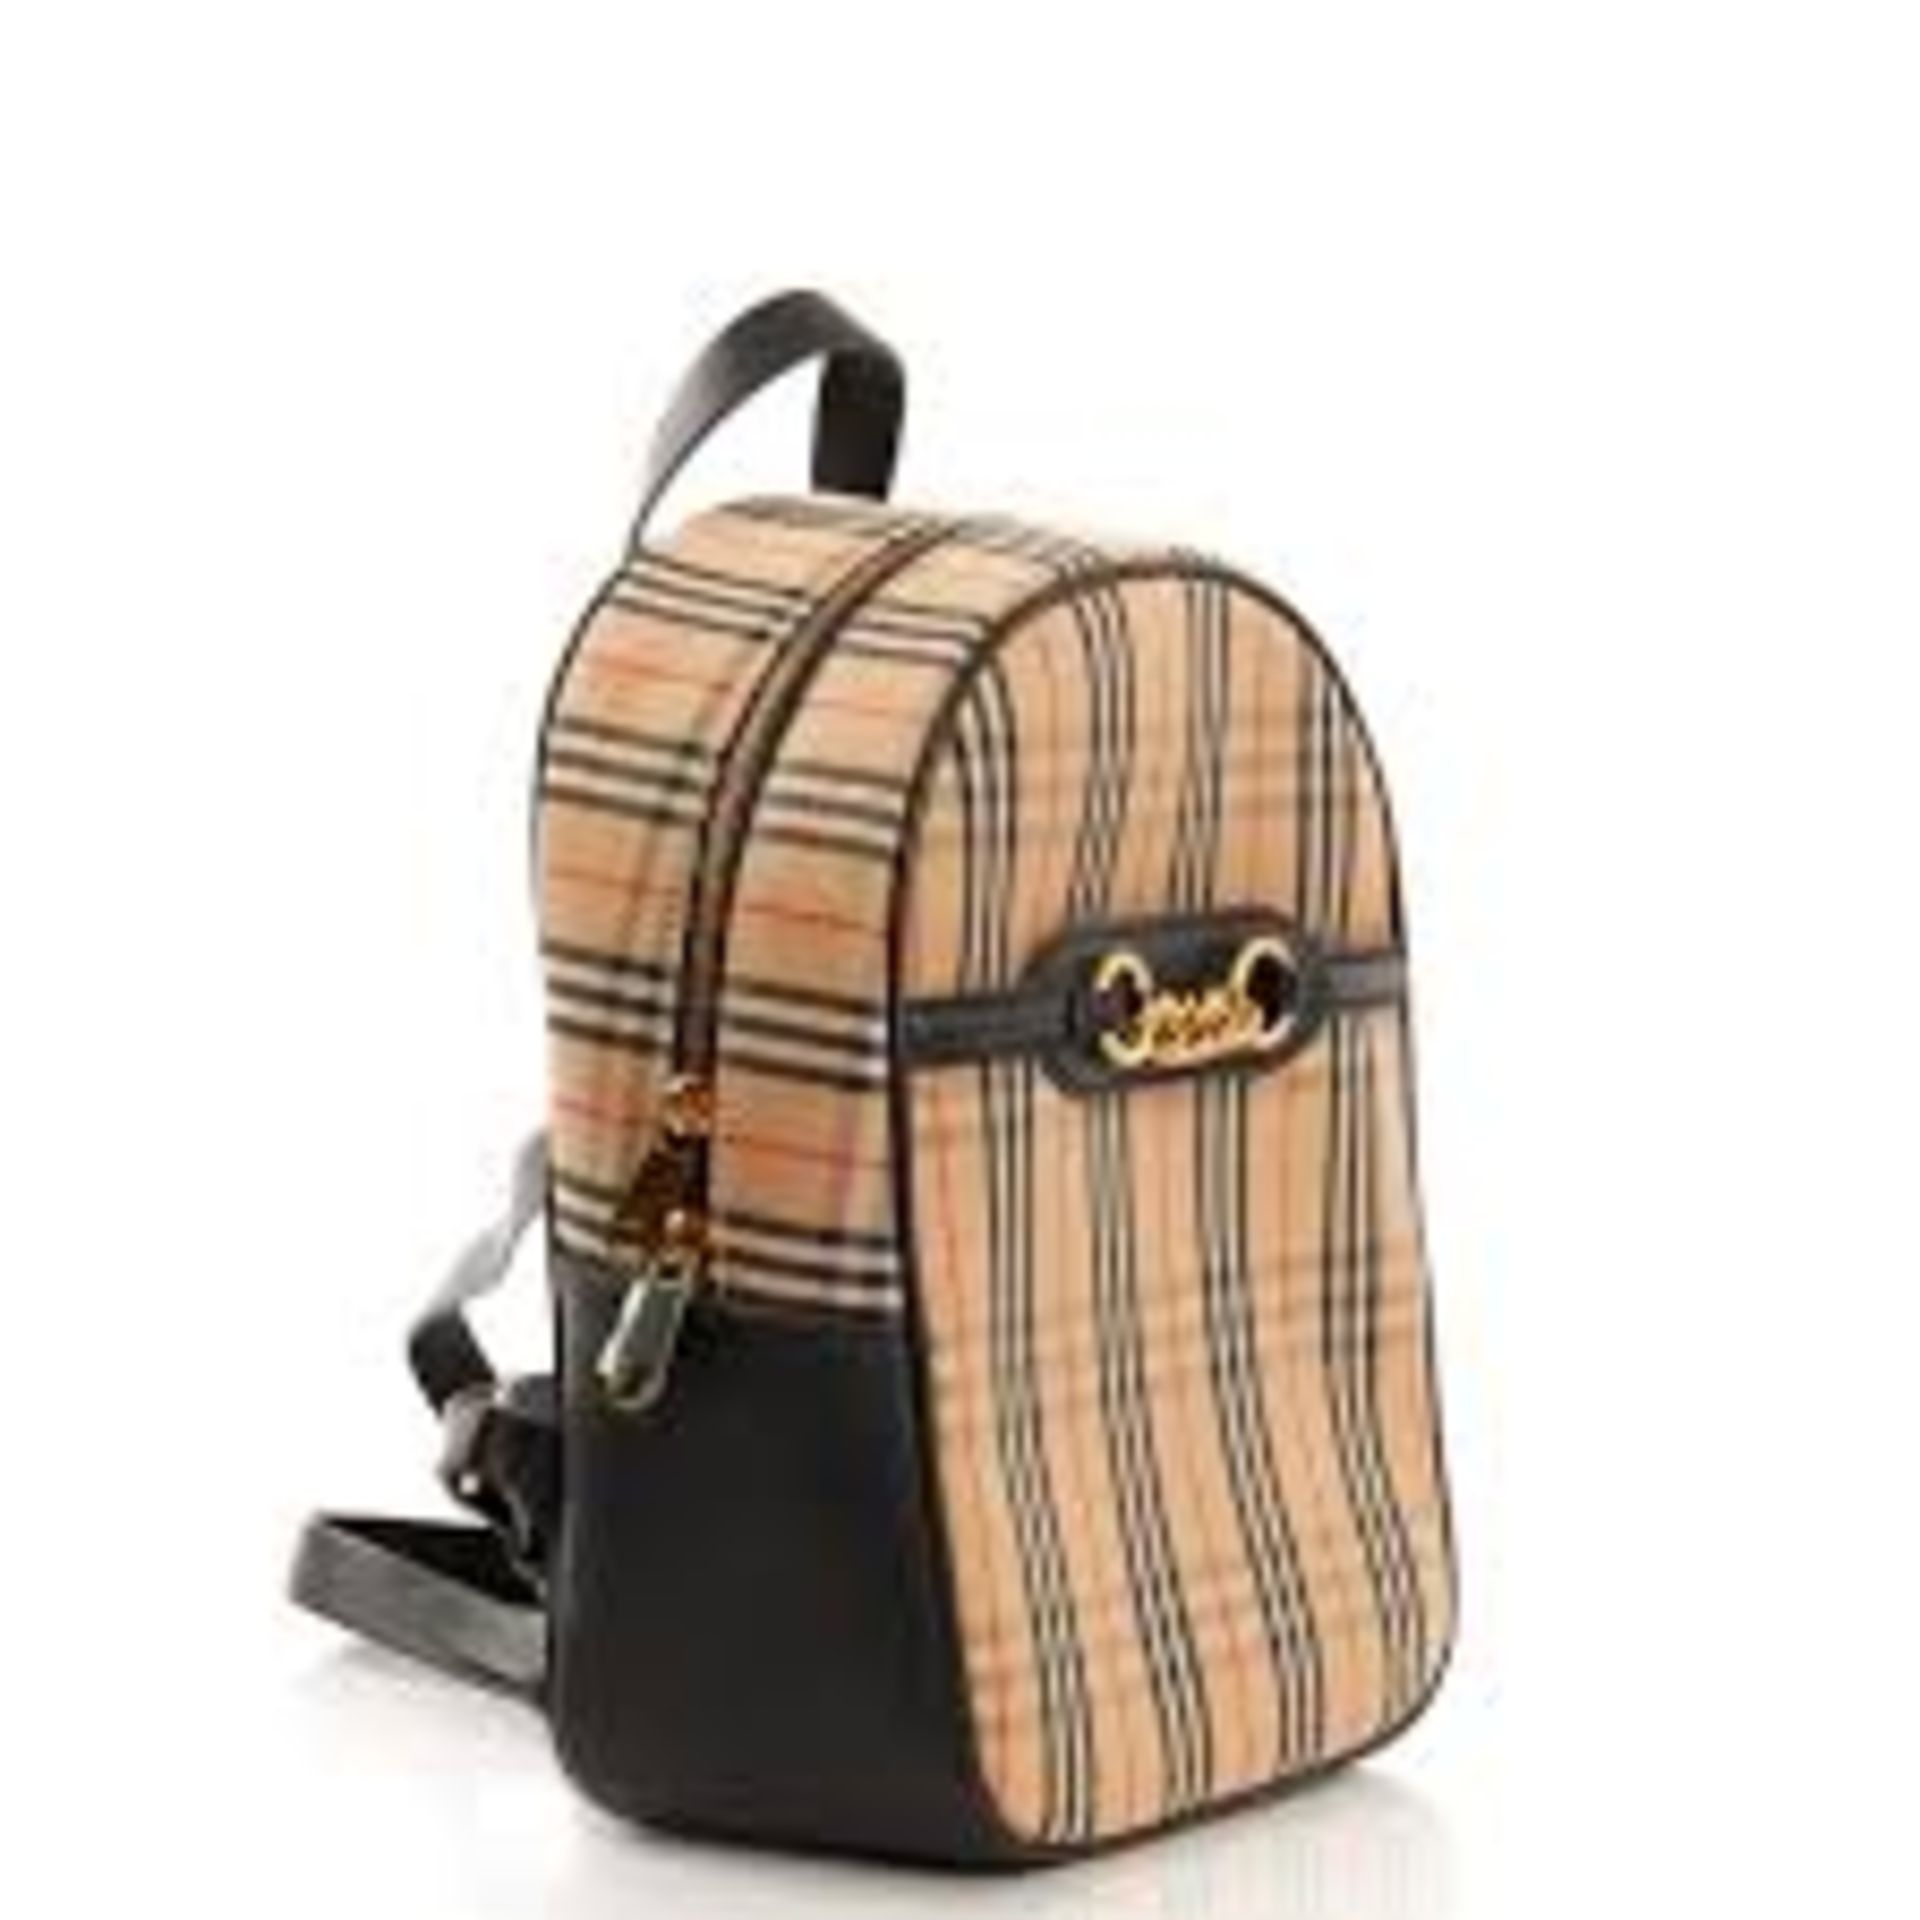 Burberry Link Backpack in Nova Check. 20x25cm. - Image 3 of 10